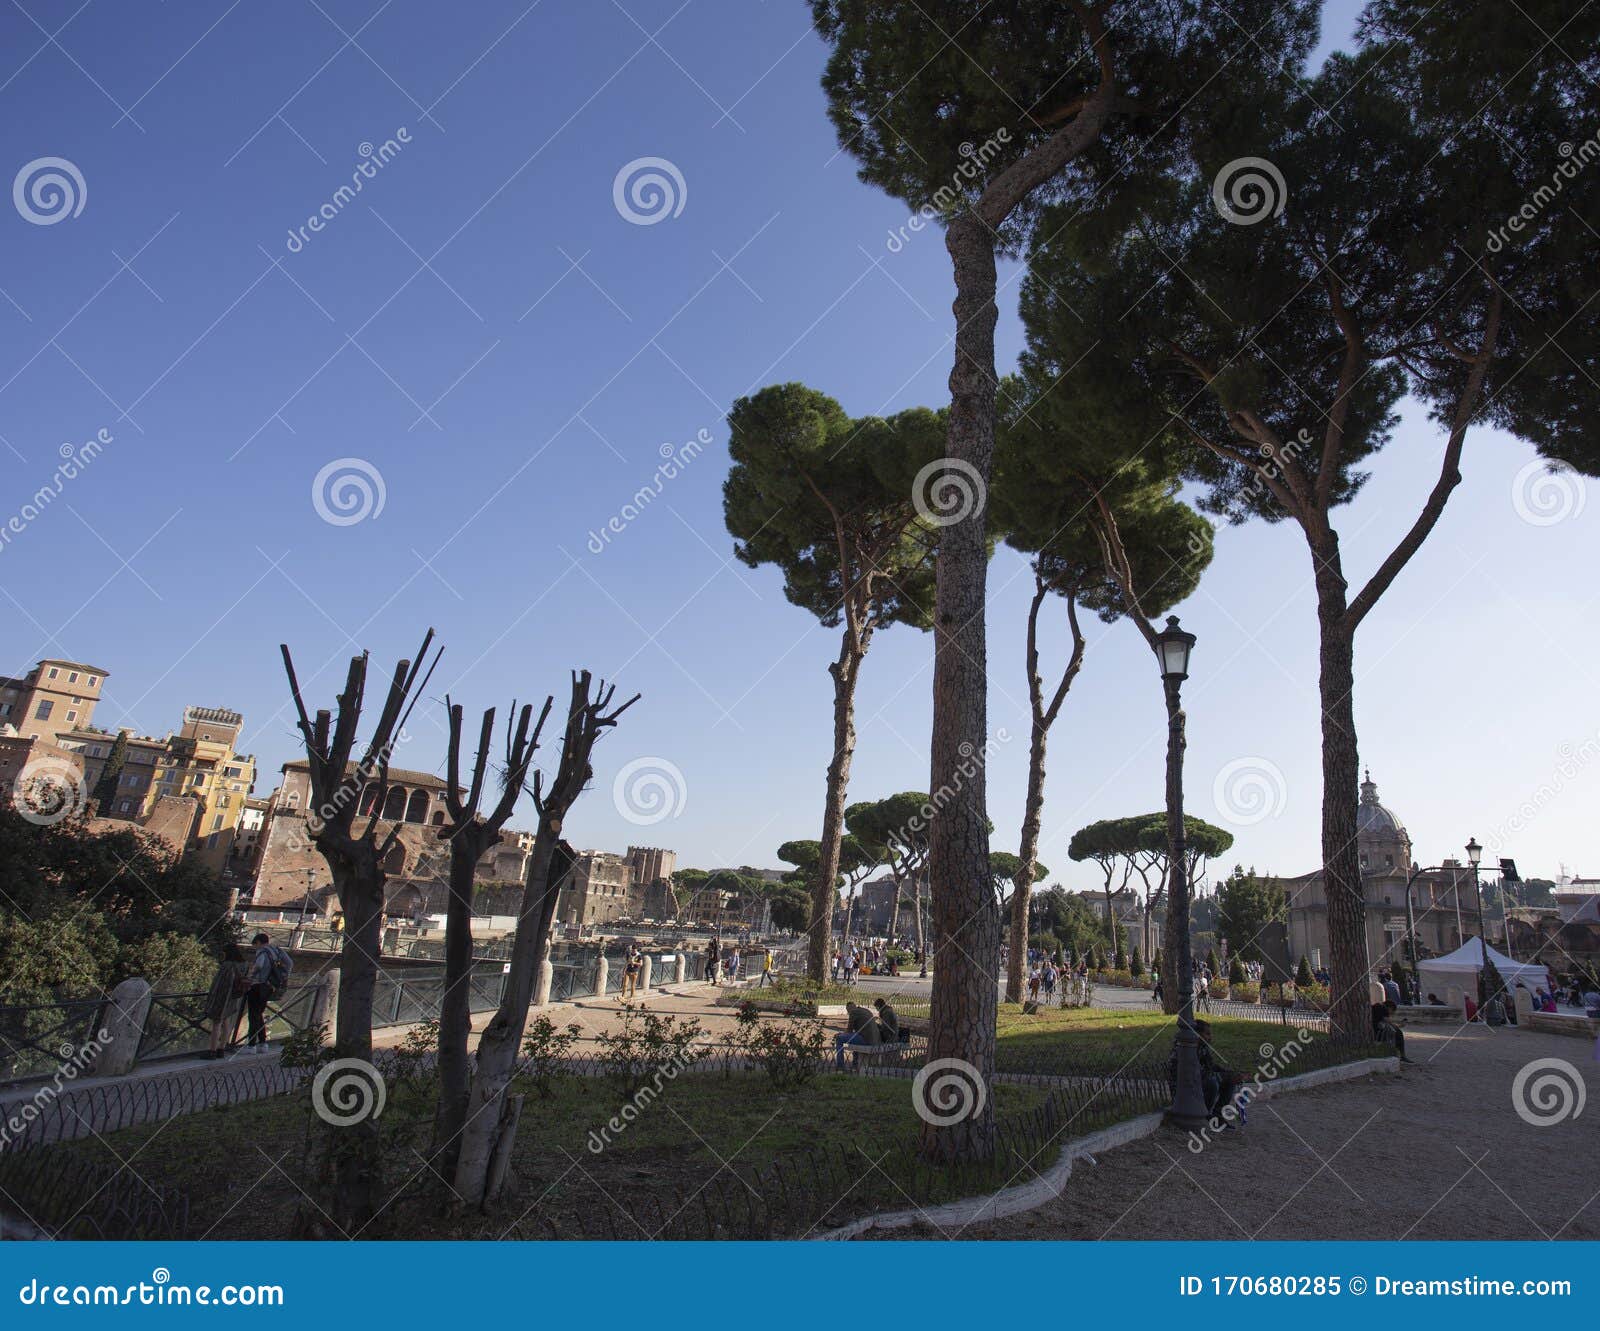 trees and blue sky along a gravel path in rome leading to piazza venetia